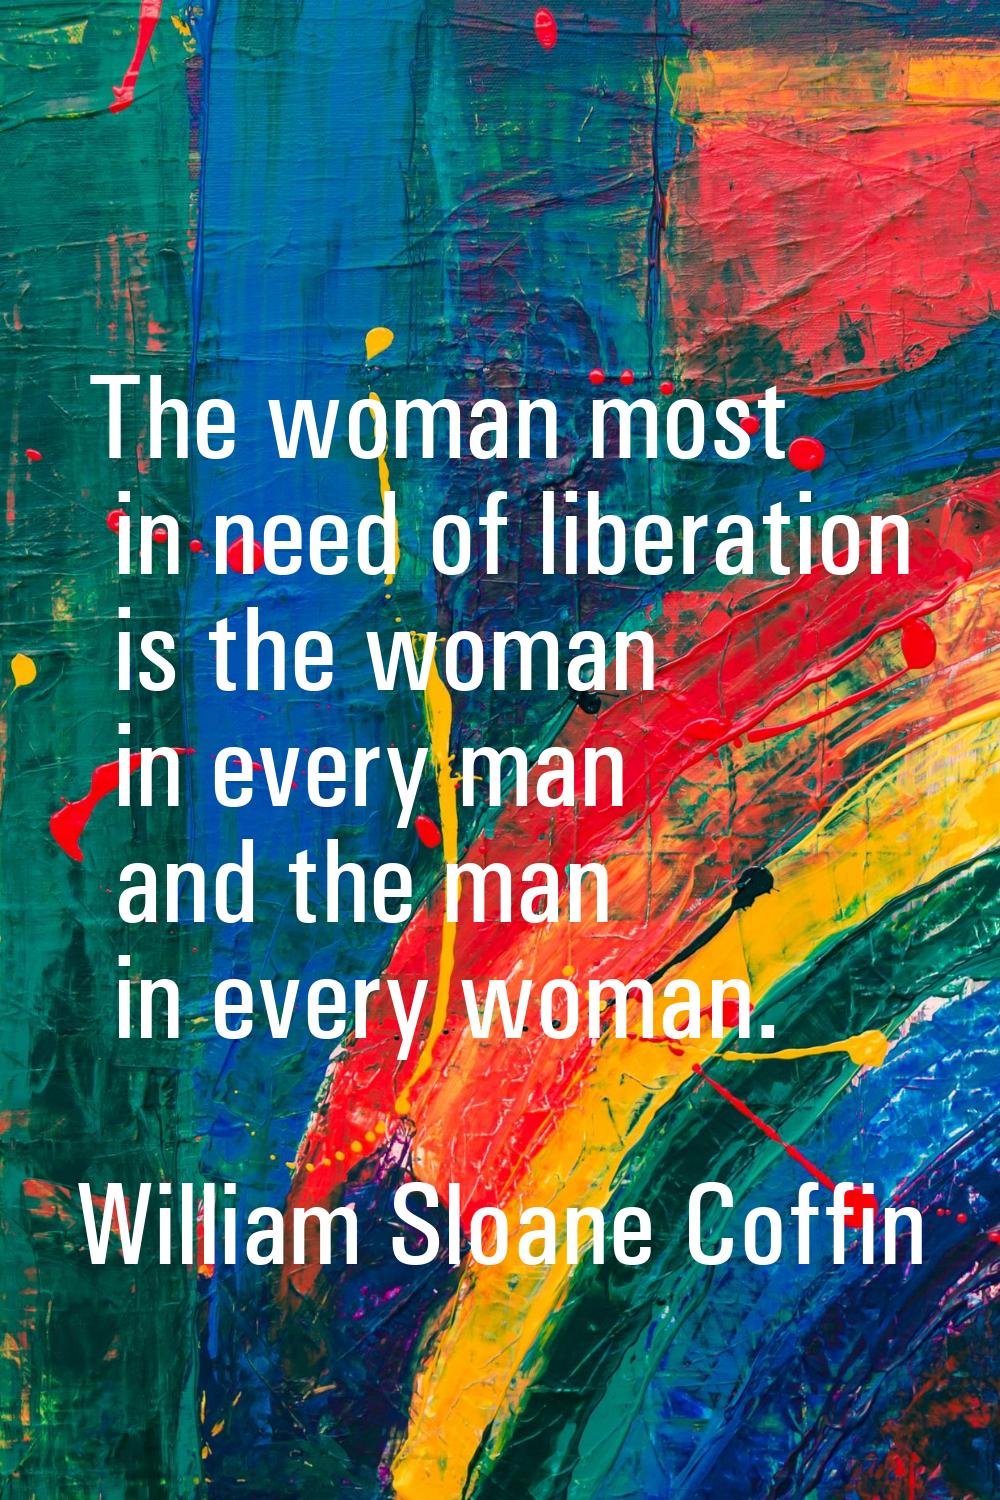 The woman most in need of liberation is the woman in every man and the man in every woman.